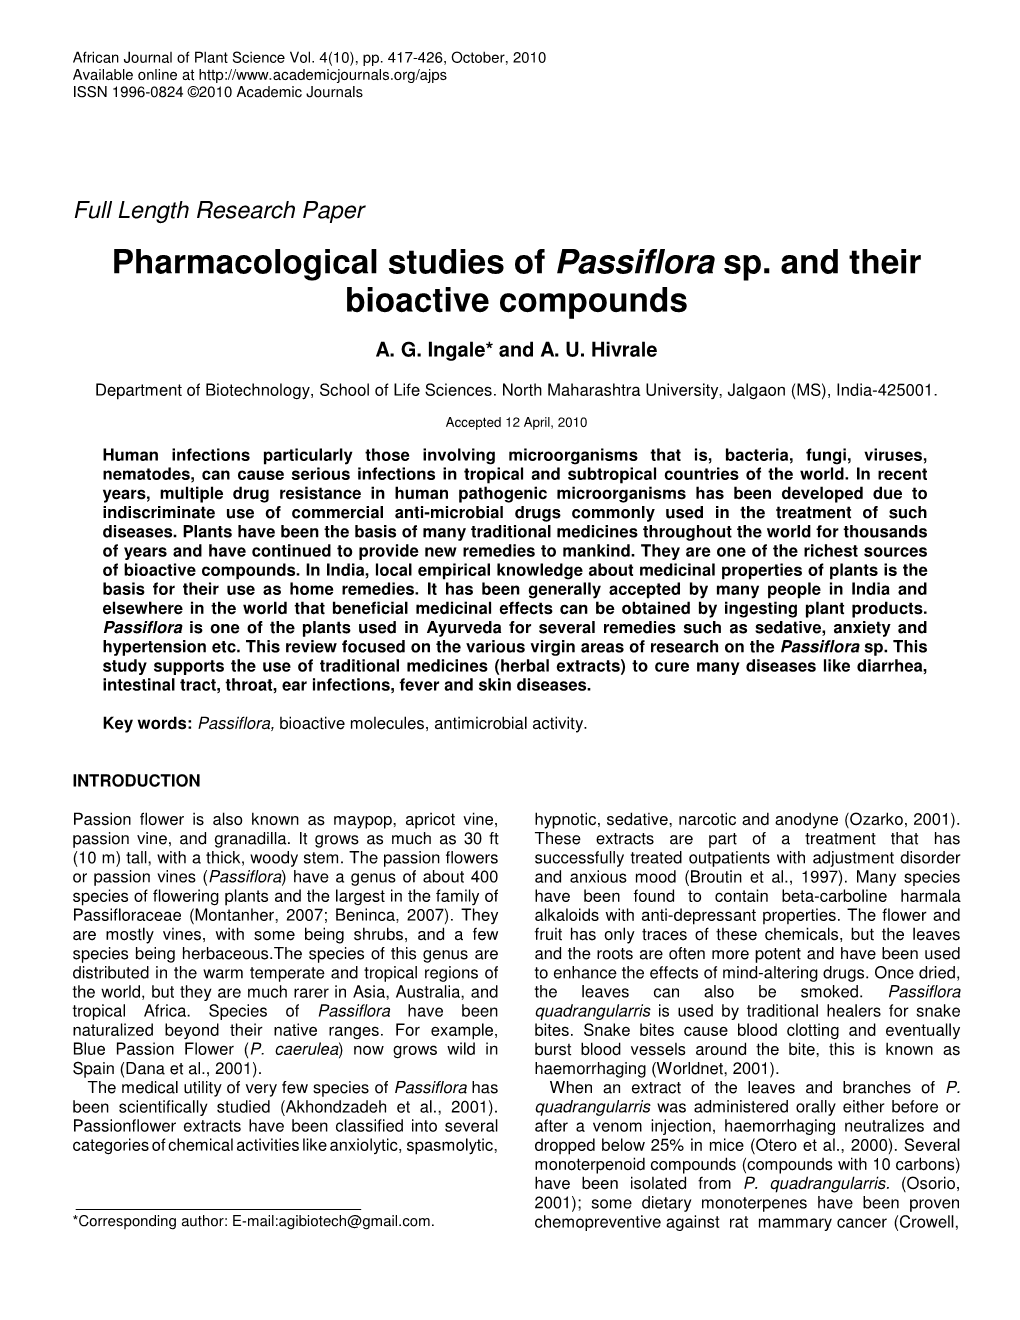 Pharmacological Studies of Passiflora Sp. and Their Bioactive Compounds